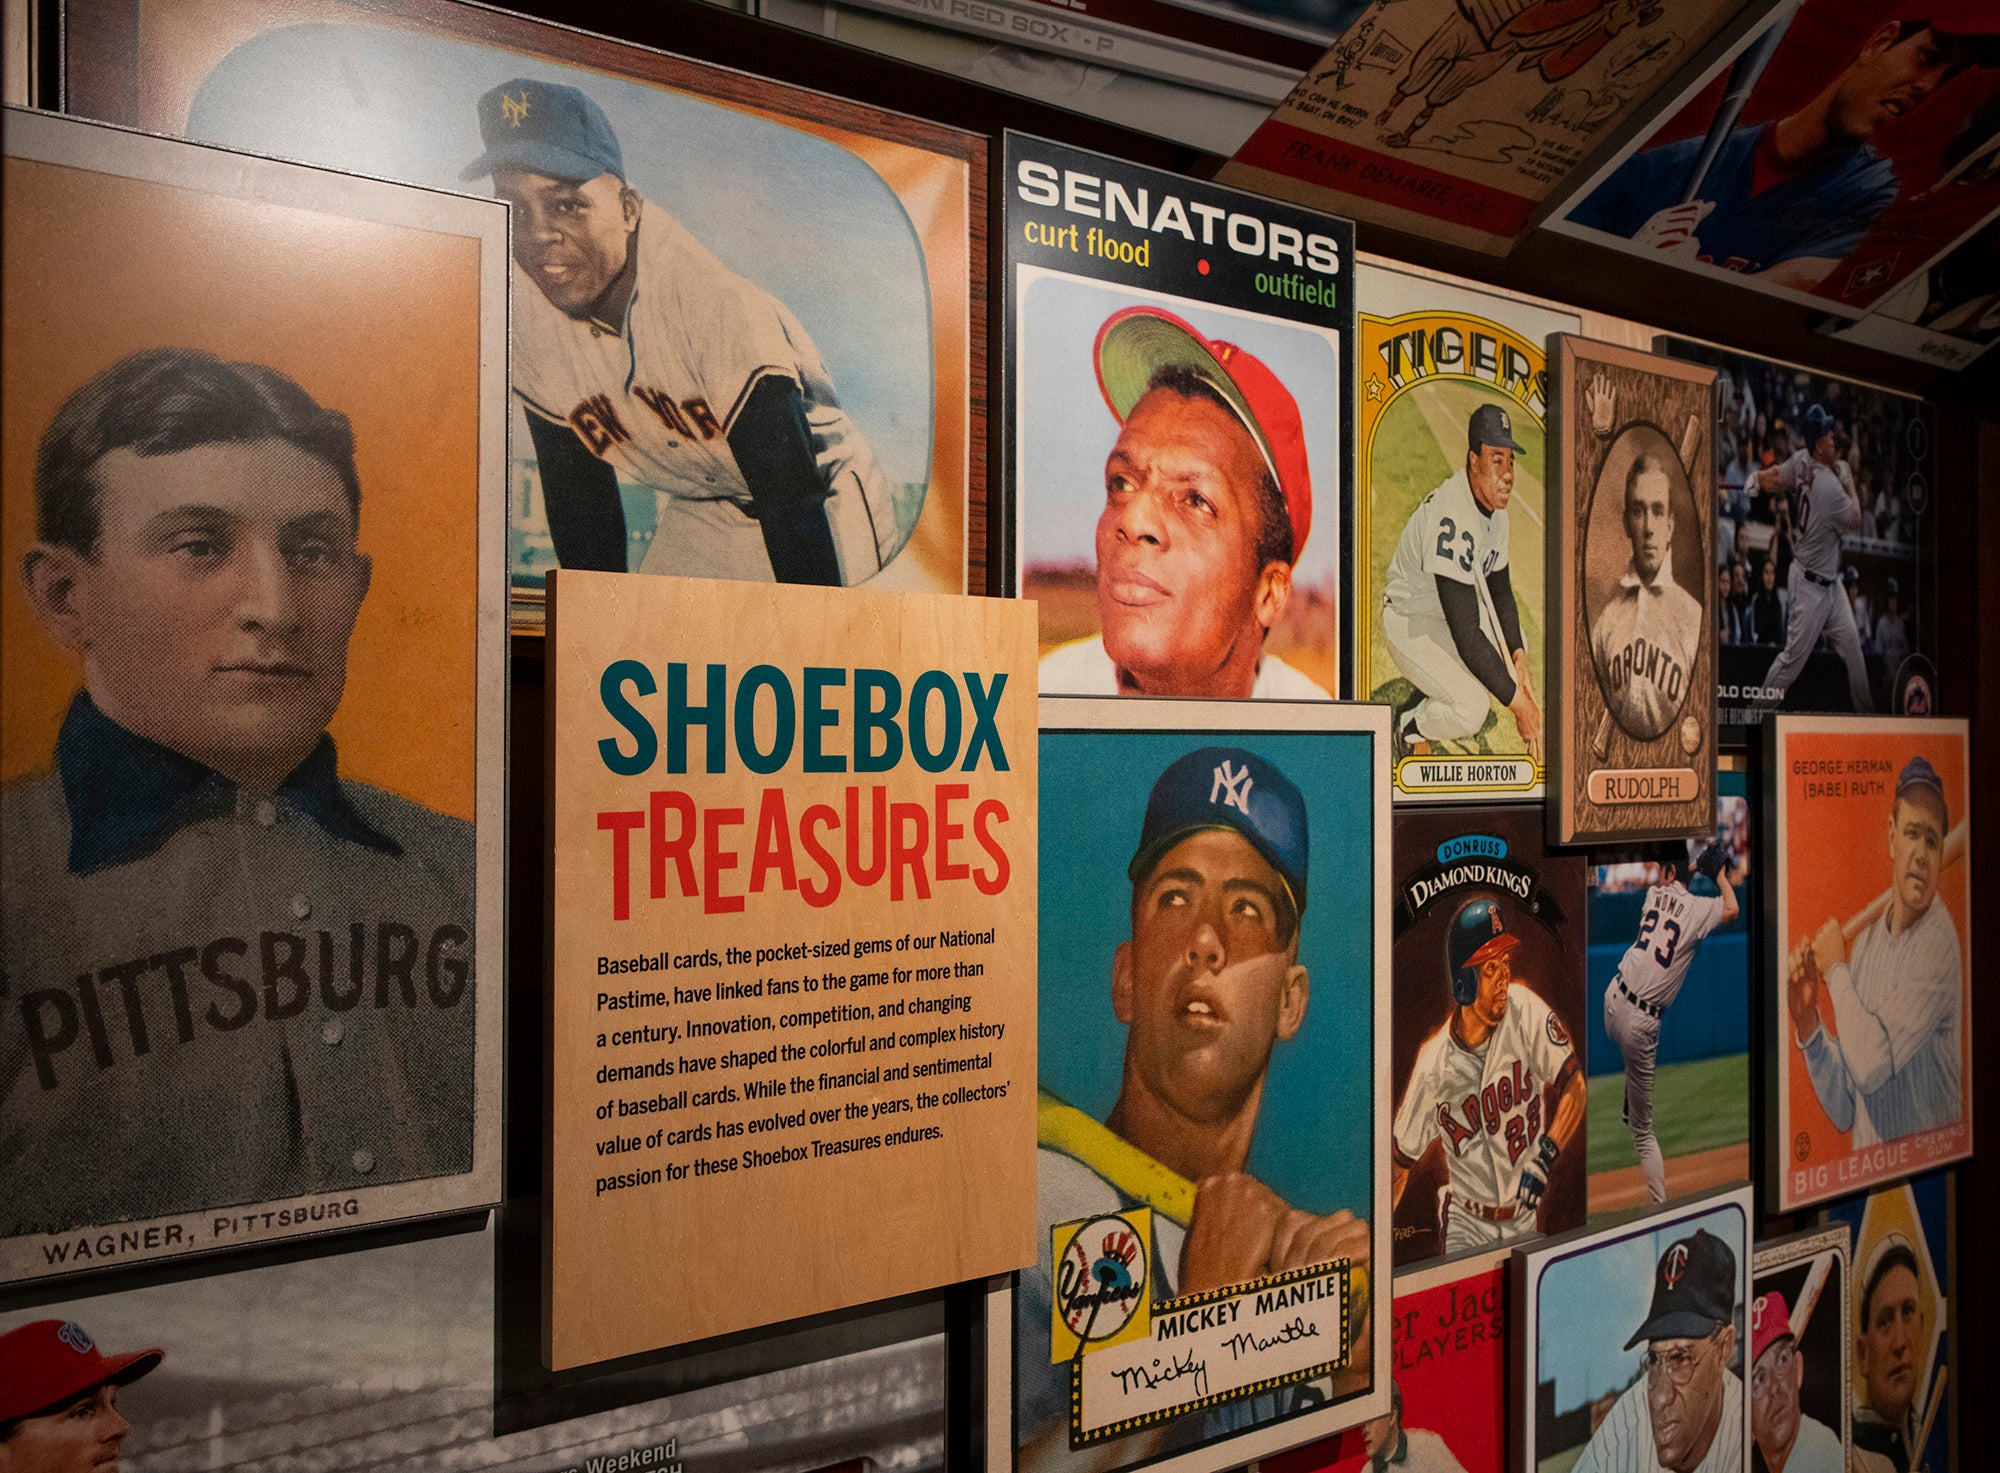 Museum's Shoebox Treasures exhibit tells the story of baseball card collecting